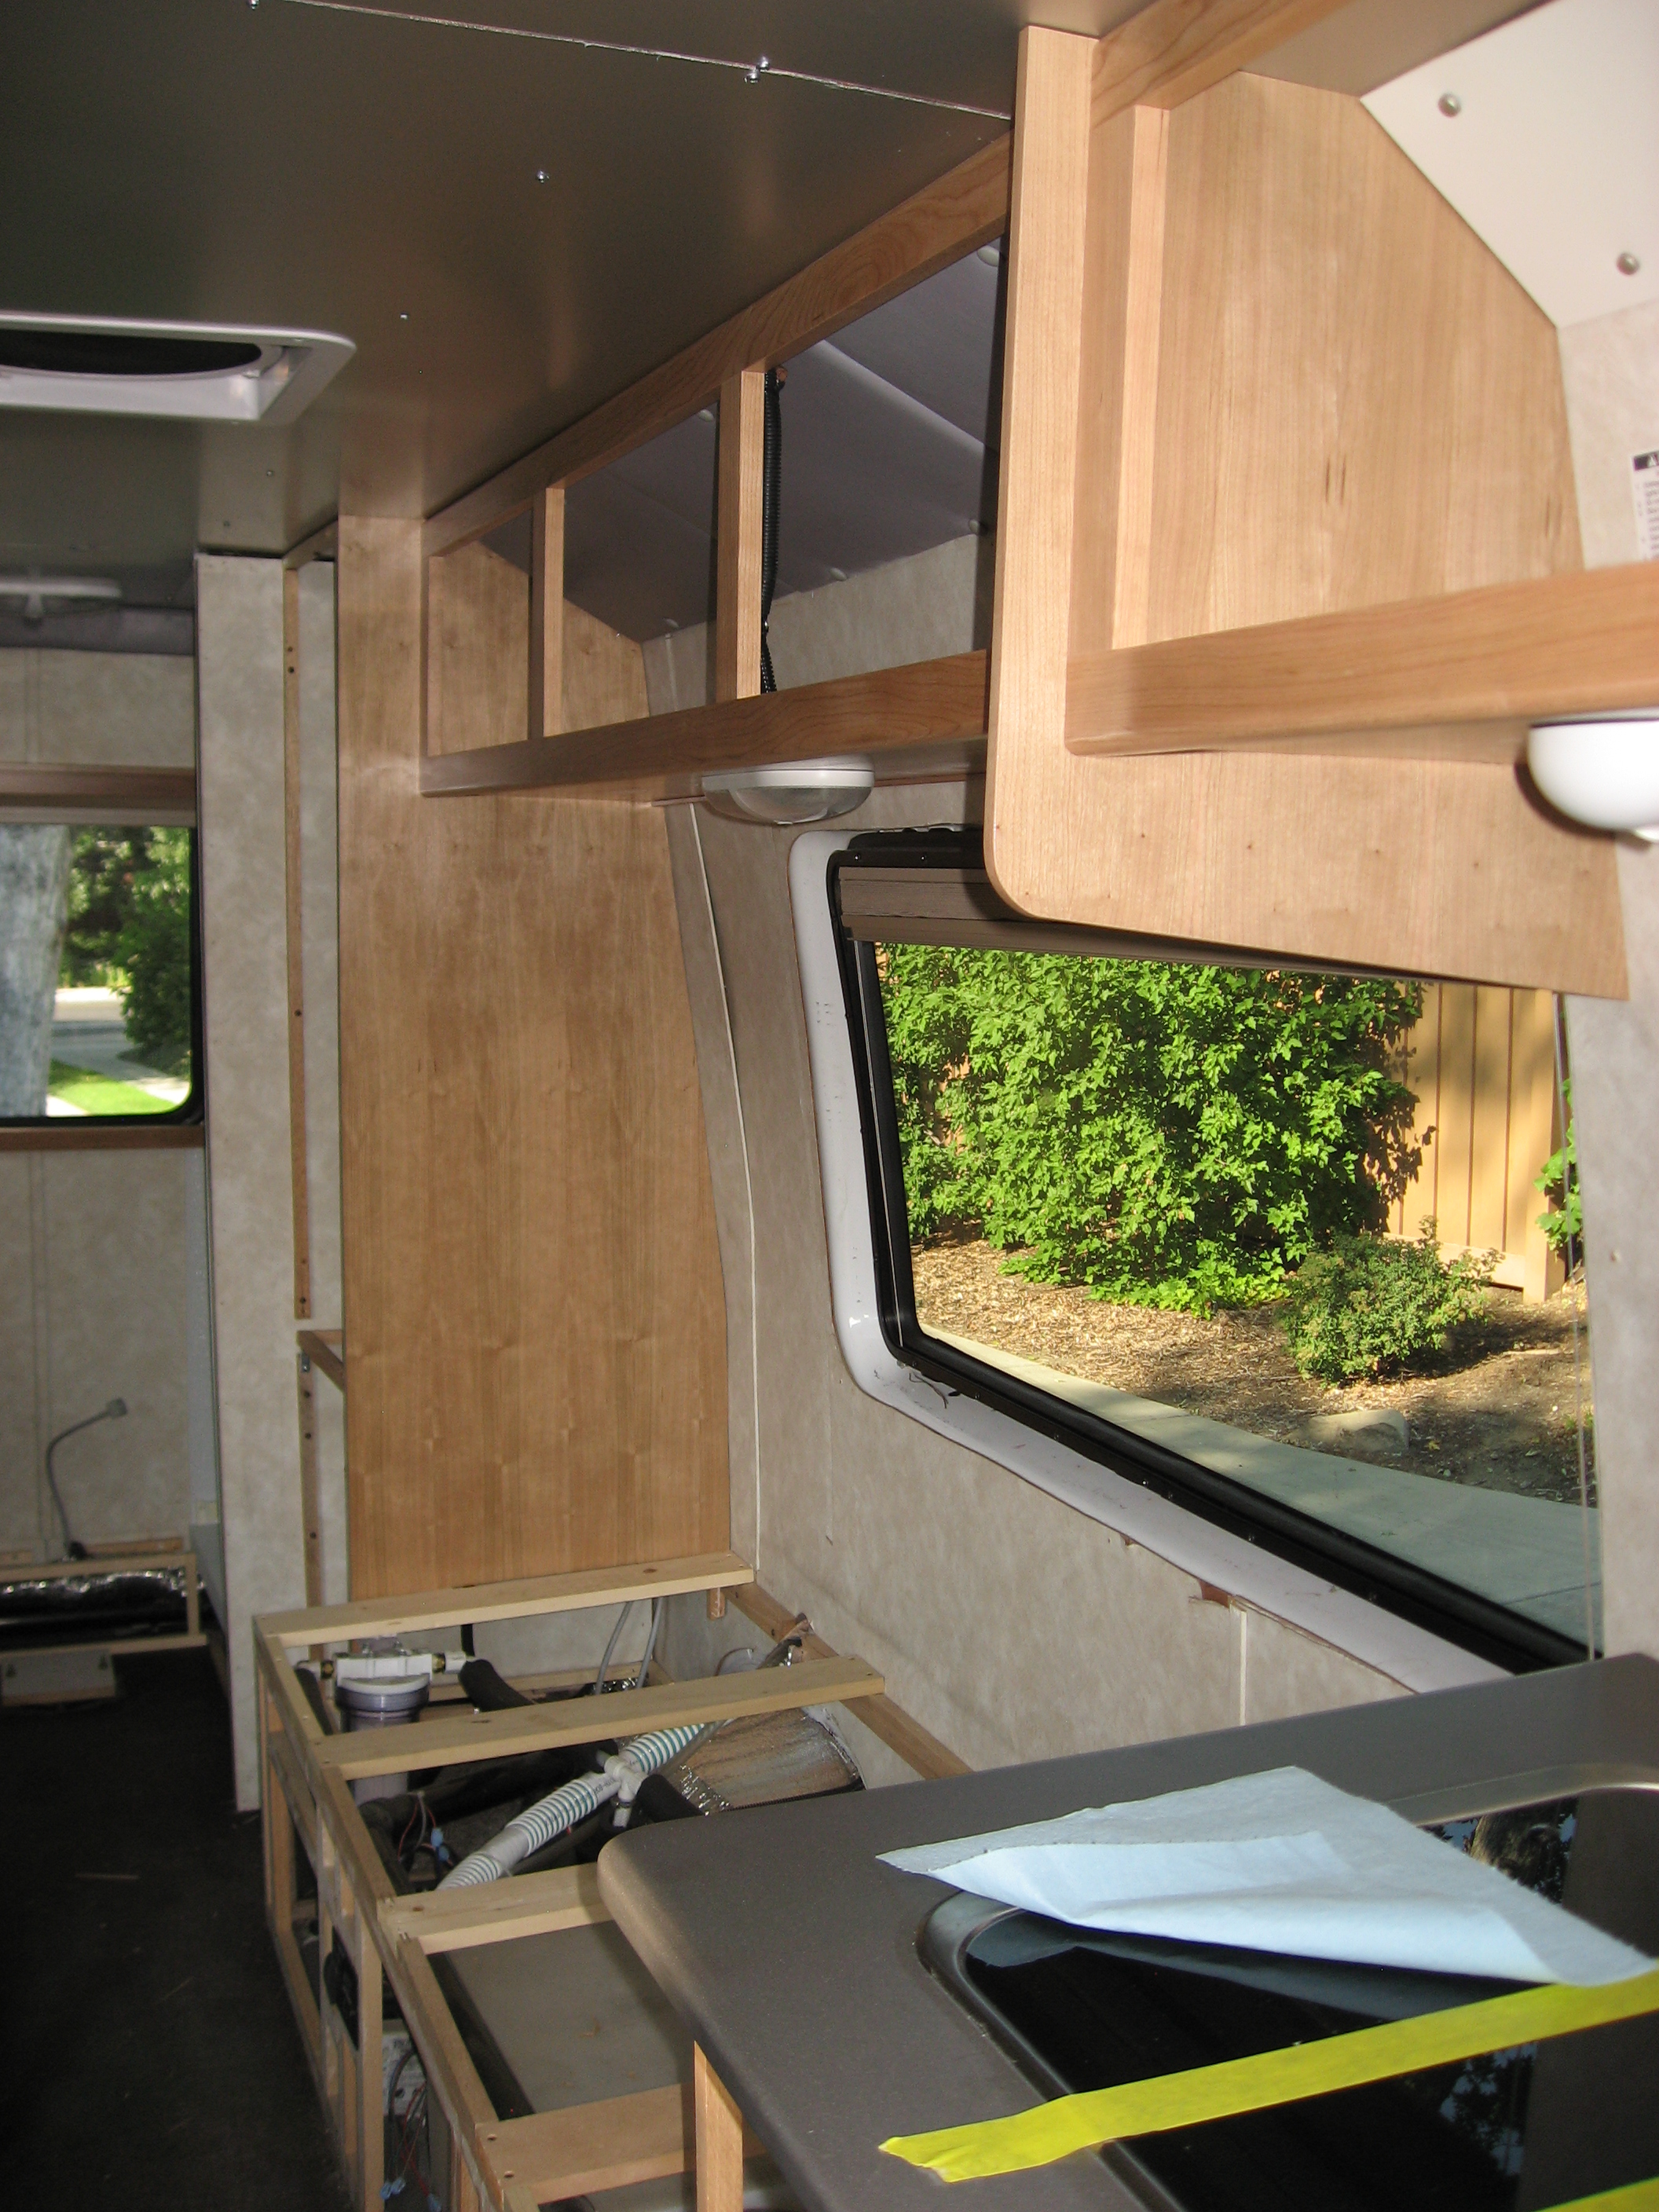 The Rv Remodel